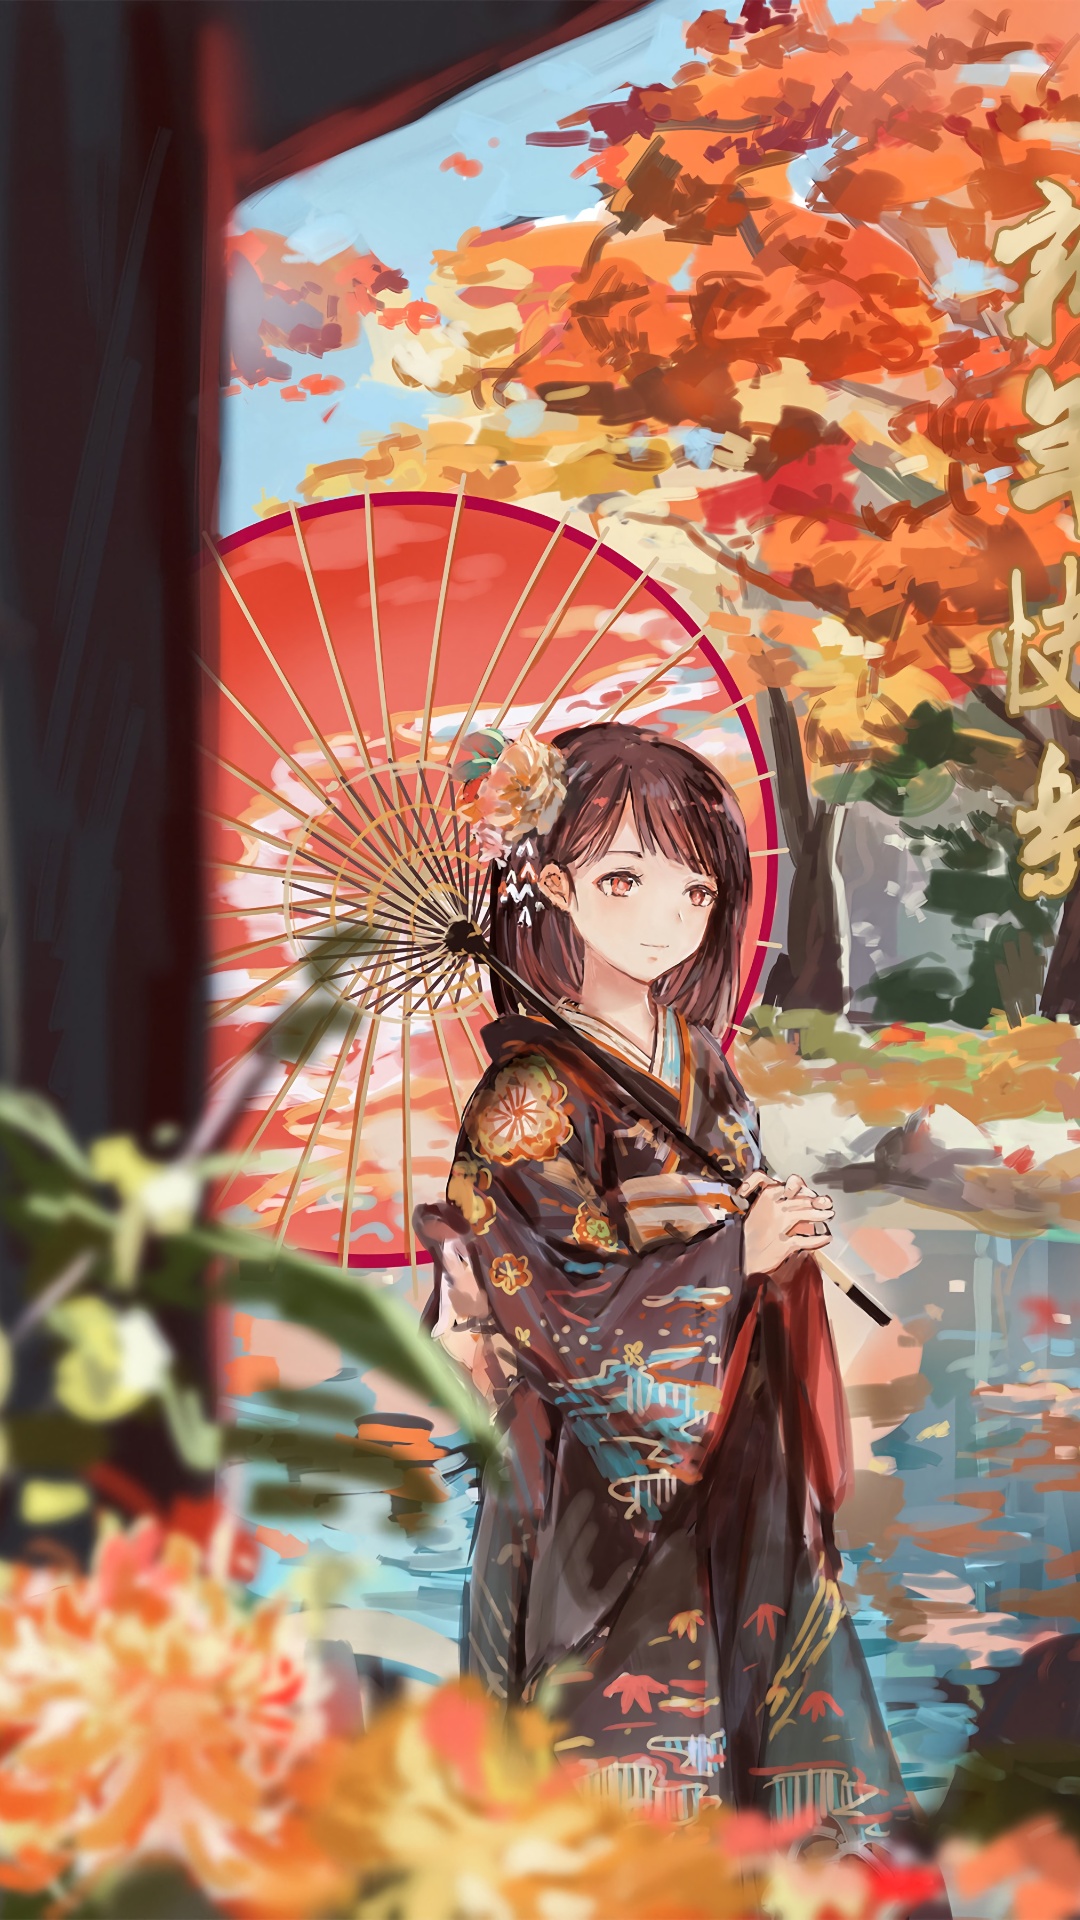 Aesthteic Anime Girl With Umbrella Wallpaper